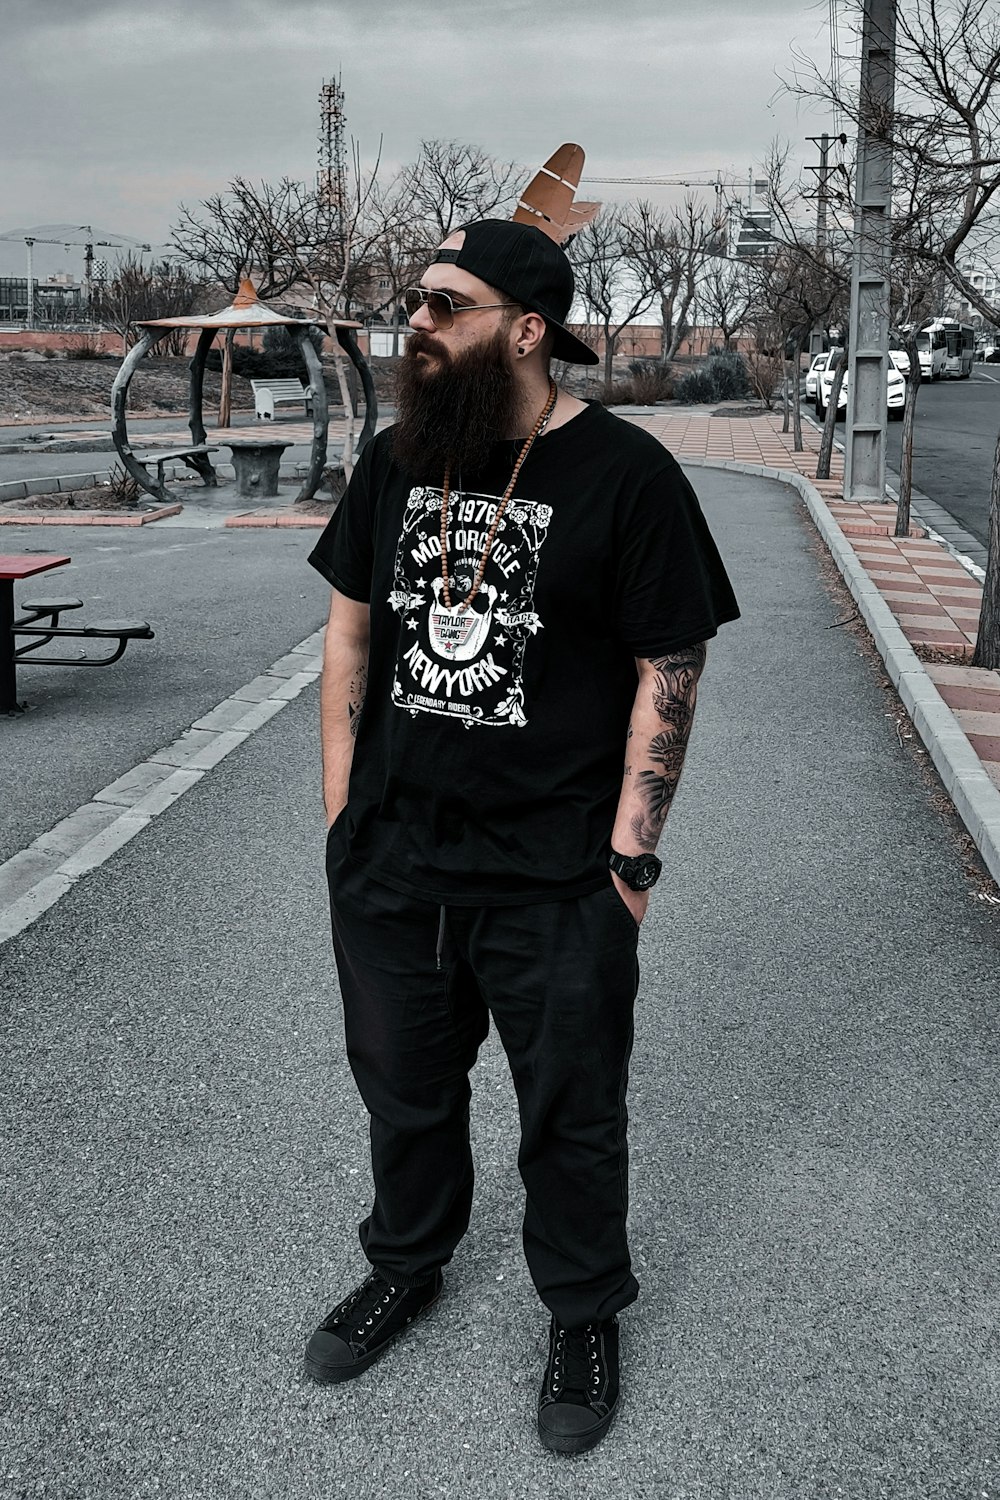 a man with a beard wearing a black shirt and black pants